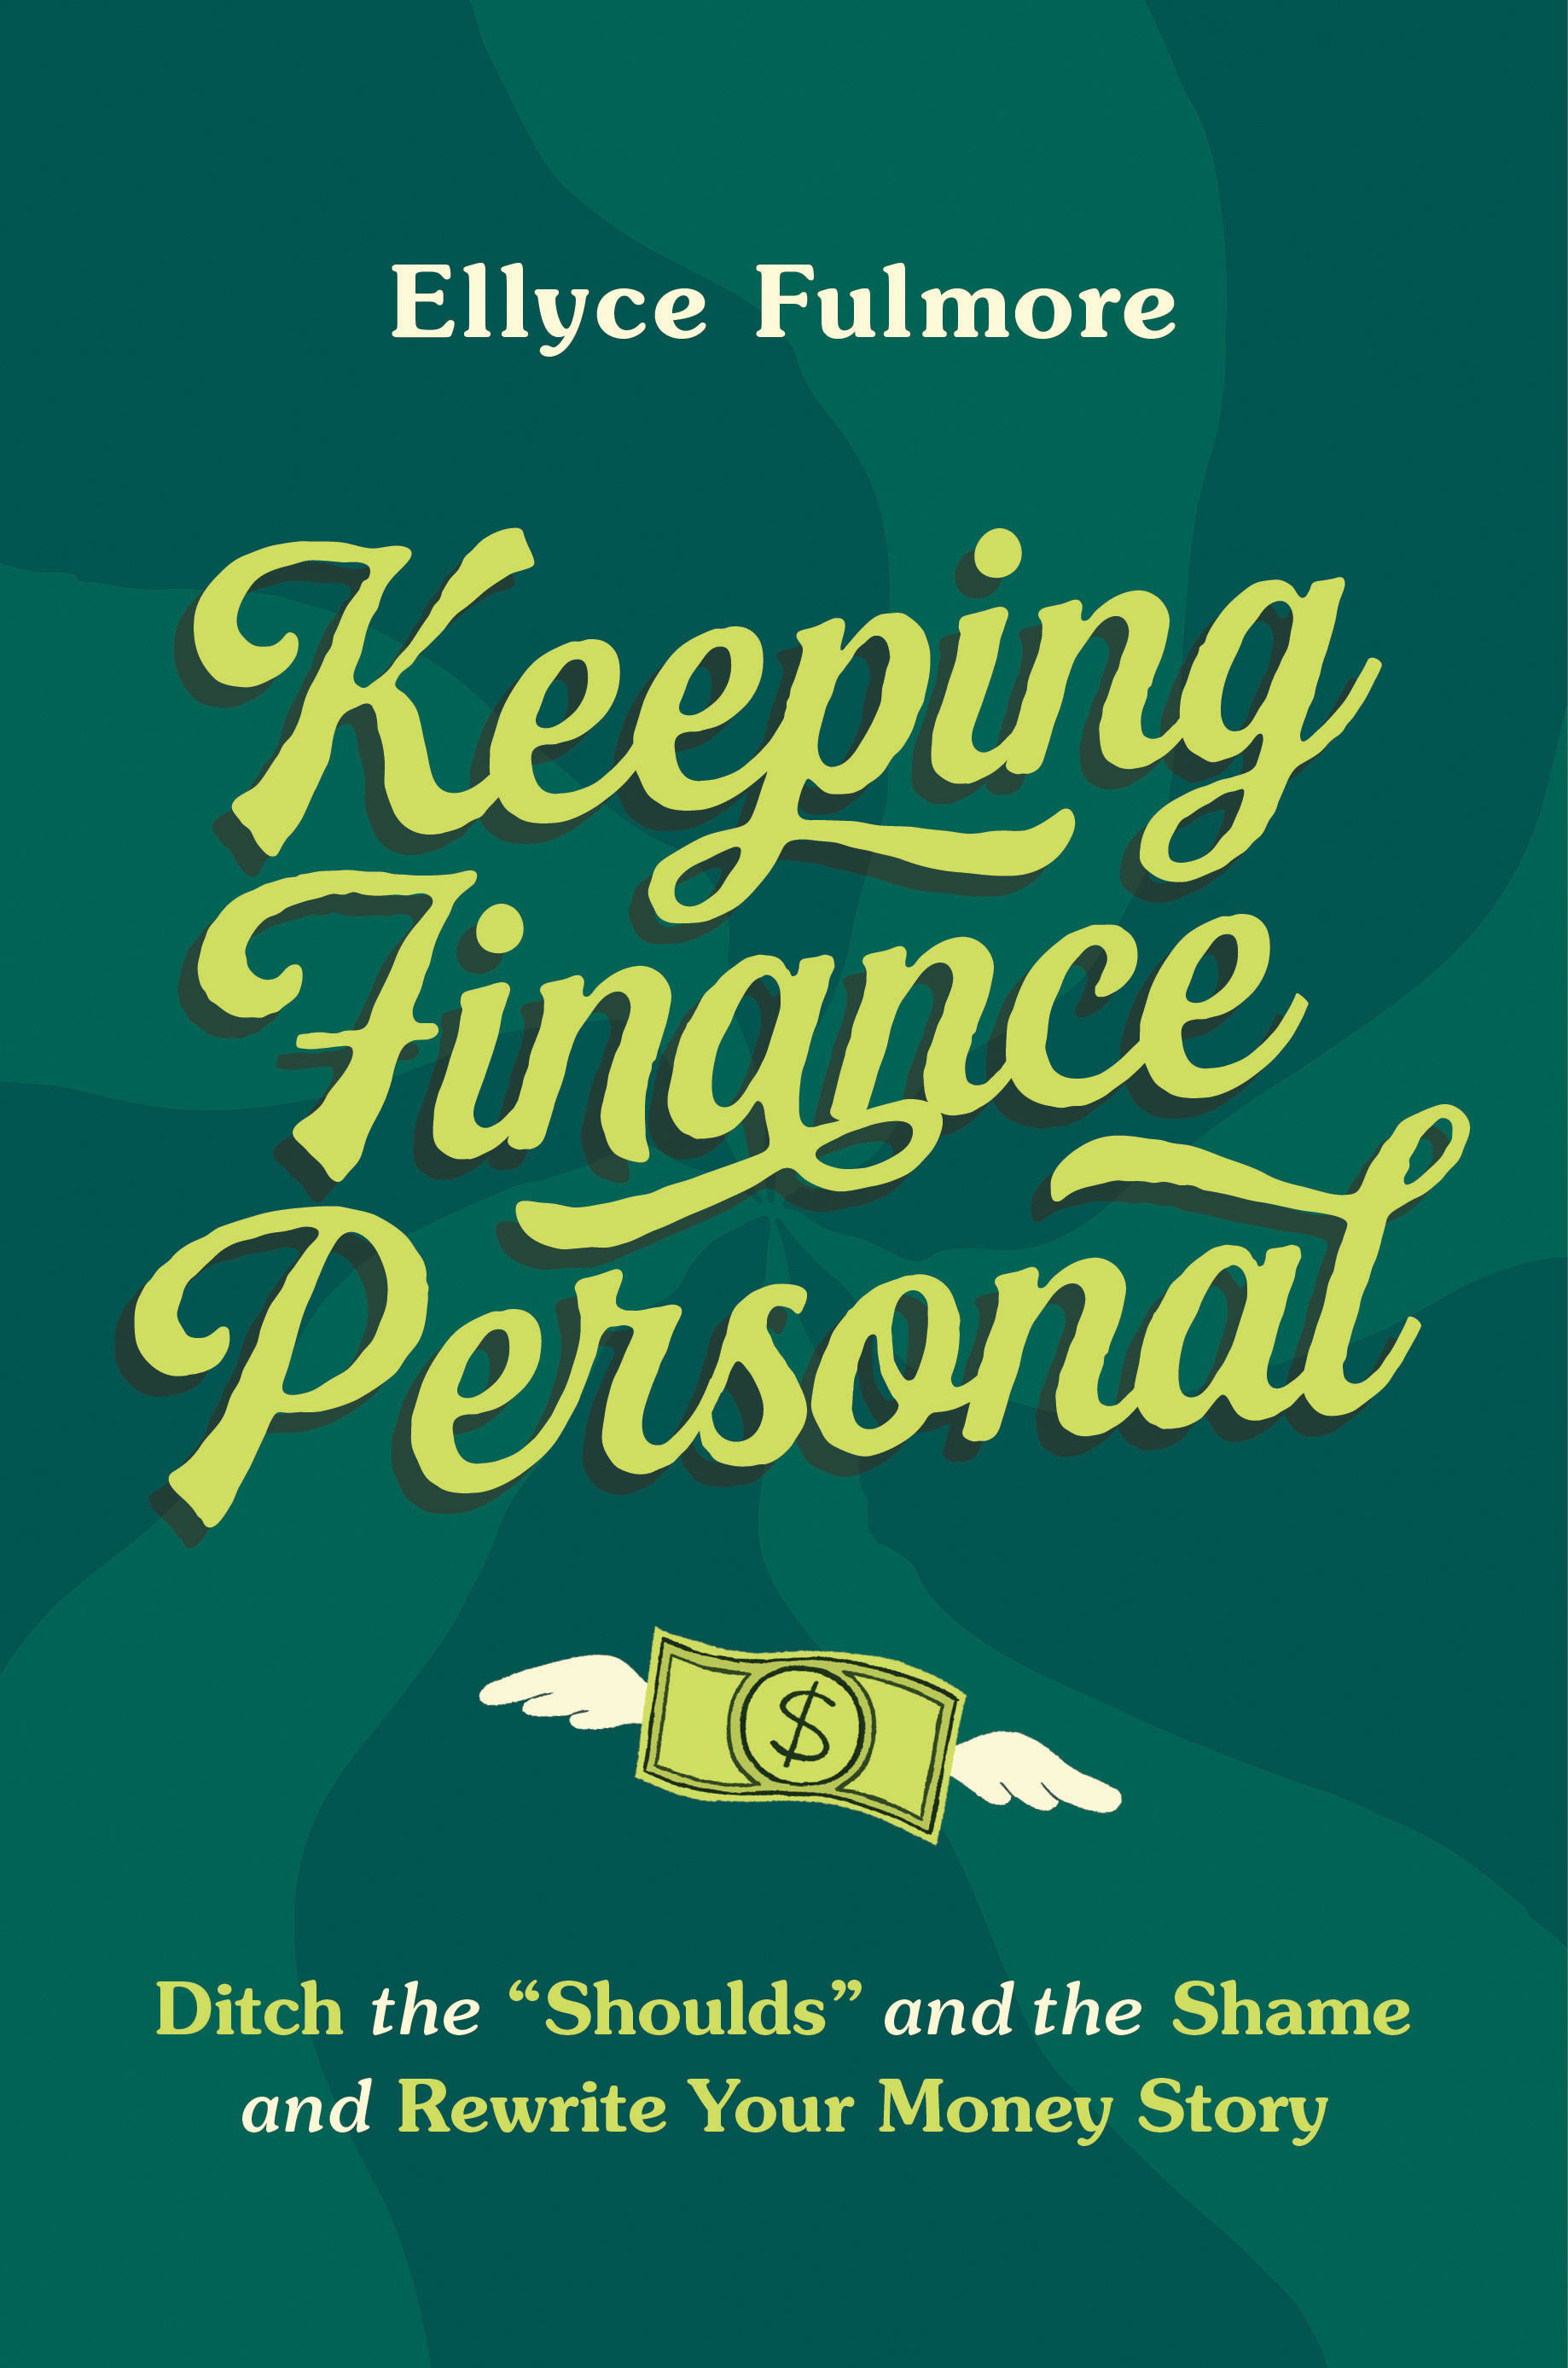 Ellyce　Personal　Hachette　Book　Fulmore　by　Finance　Keeping　Group